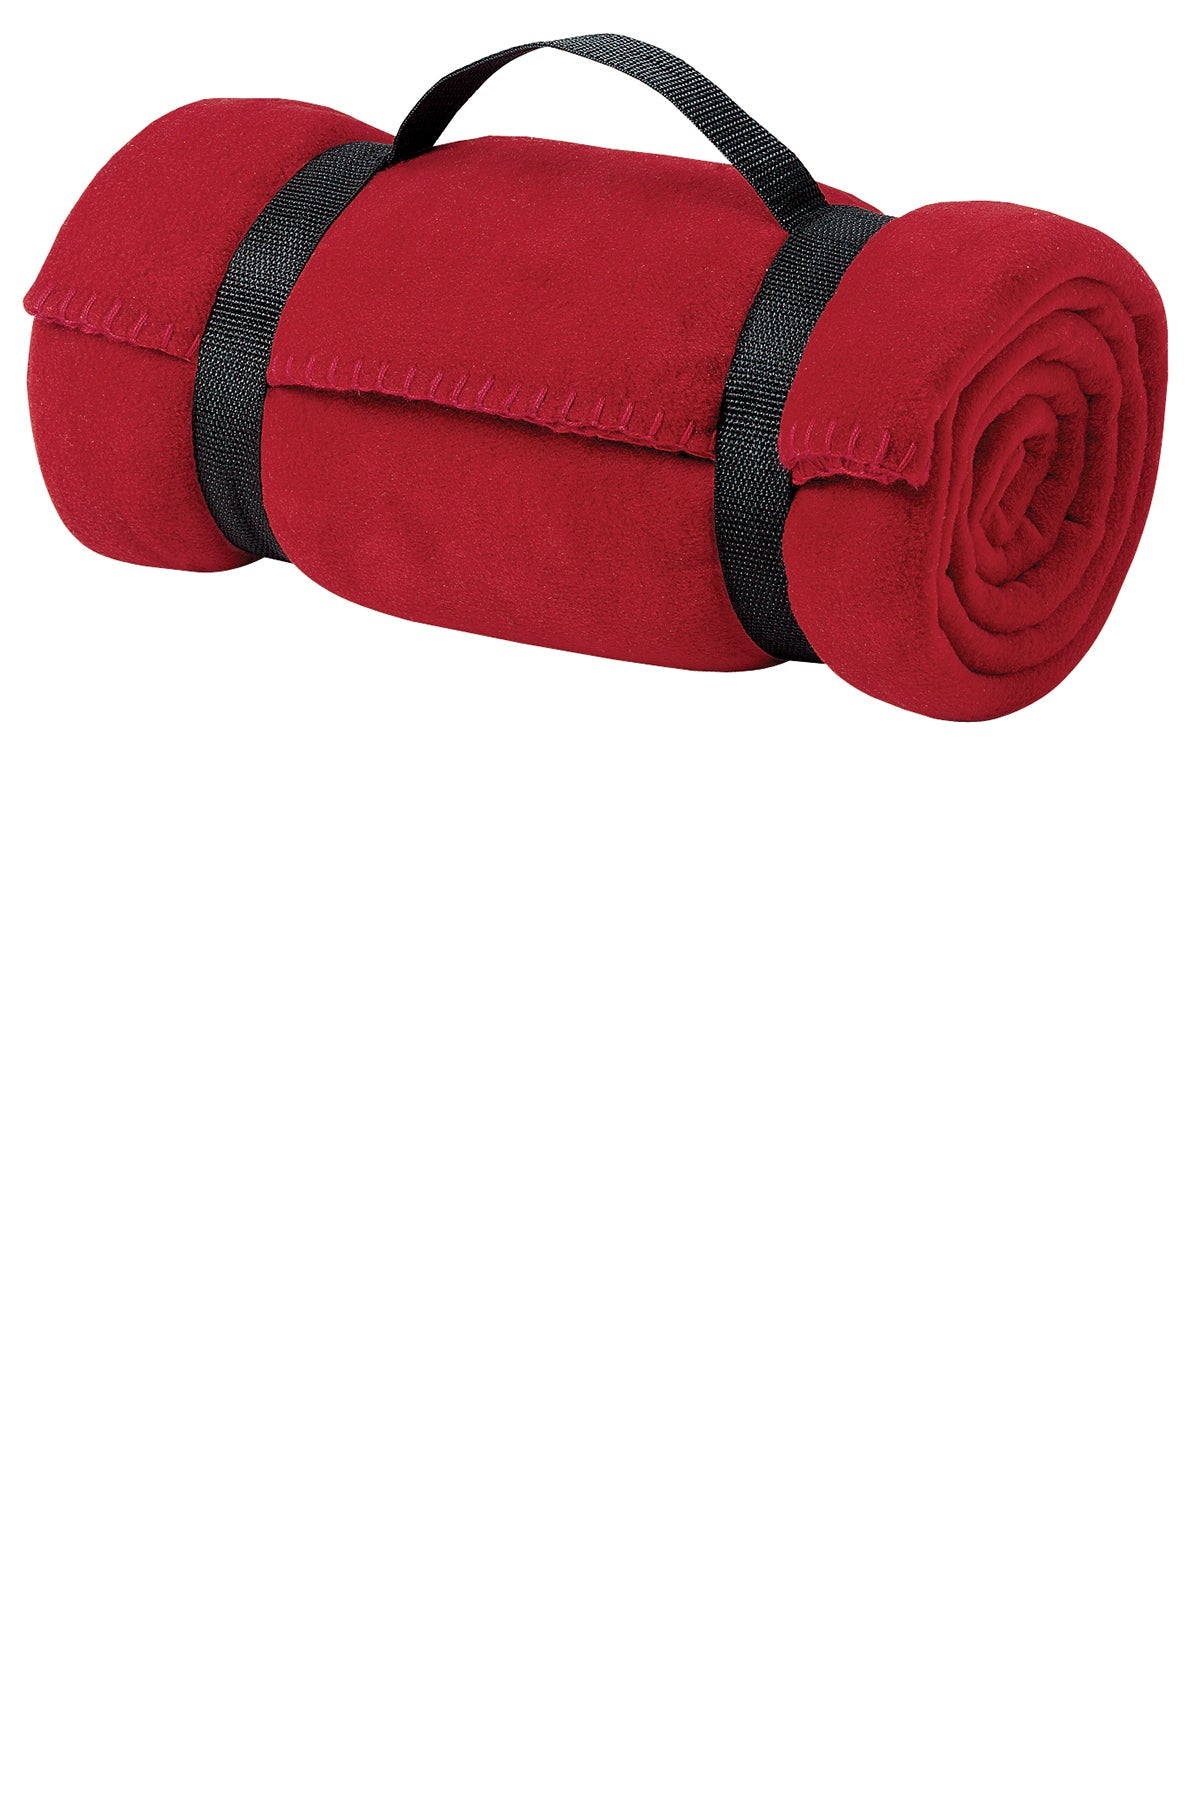 Port Authority - Value Fleece Custom Blankets with Strap, Red